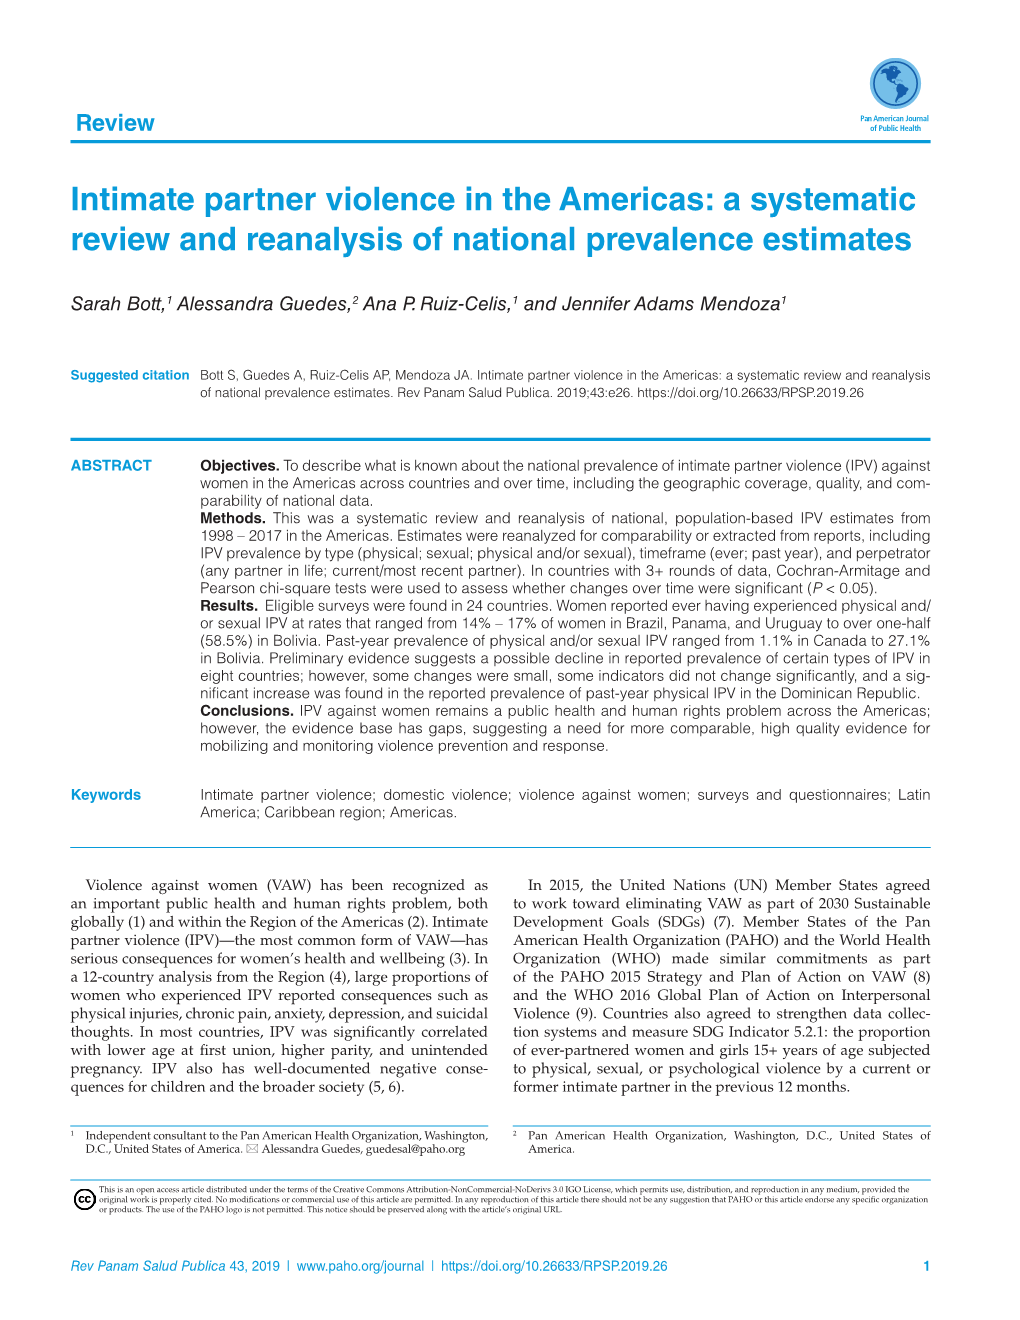 Intimate Partner Violence in the Americas: a Systematic Review and Reanalysis 16 of National Prevalence Estimates